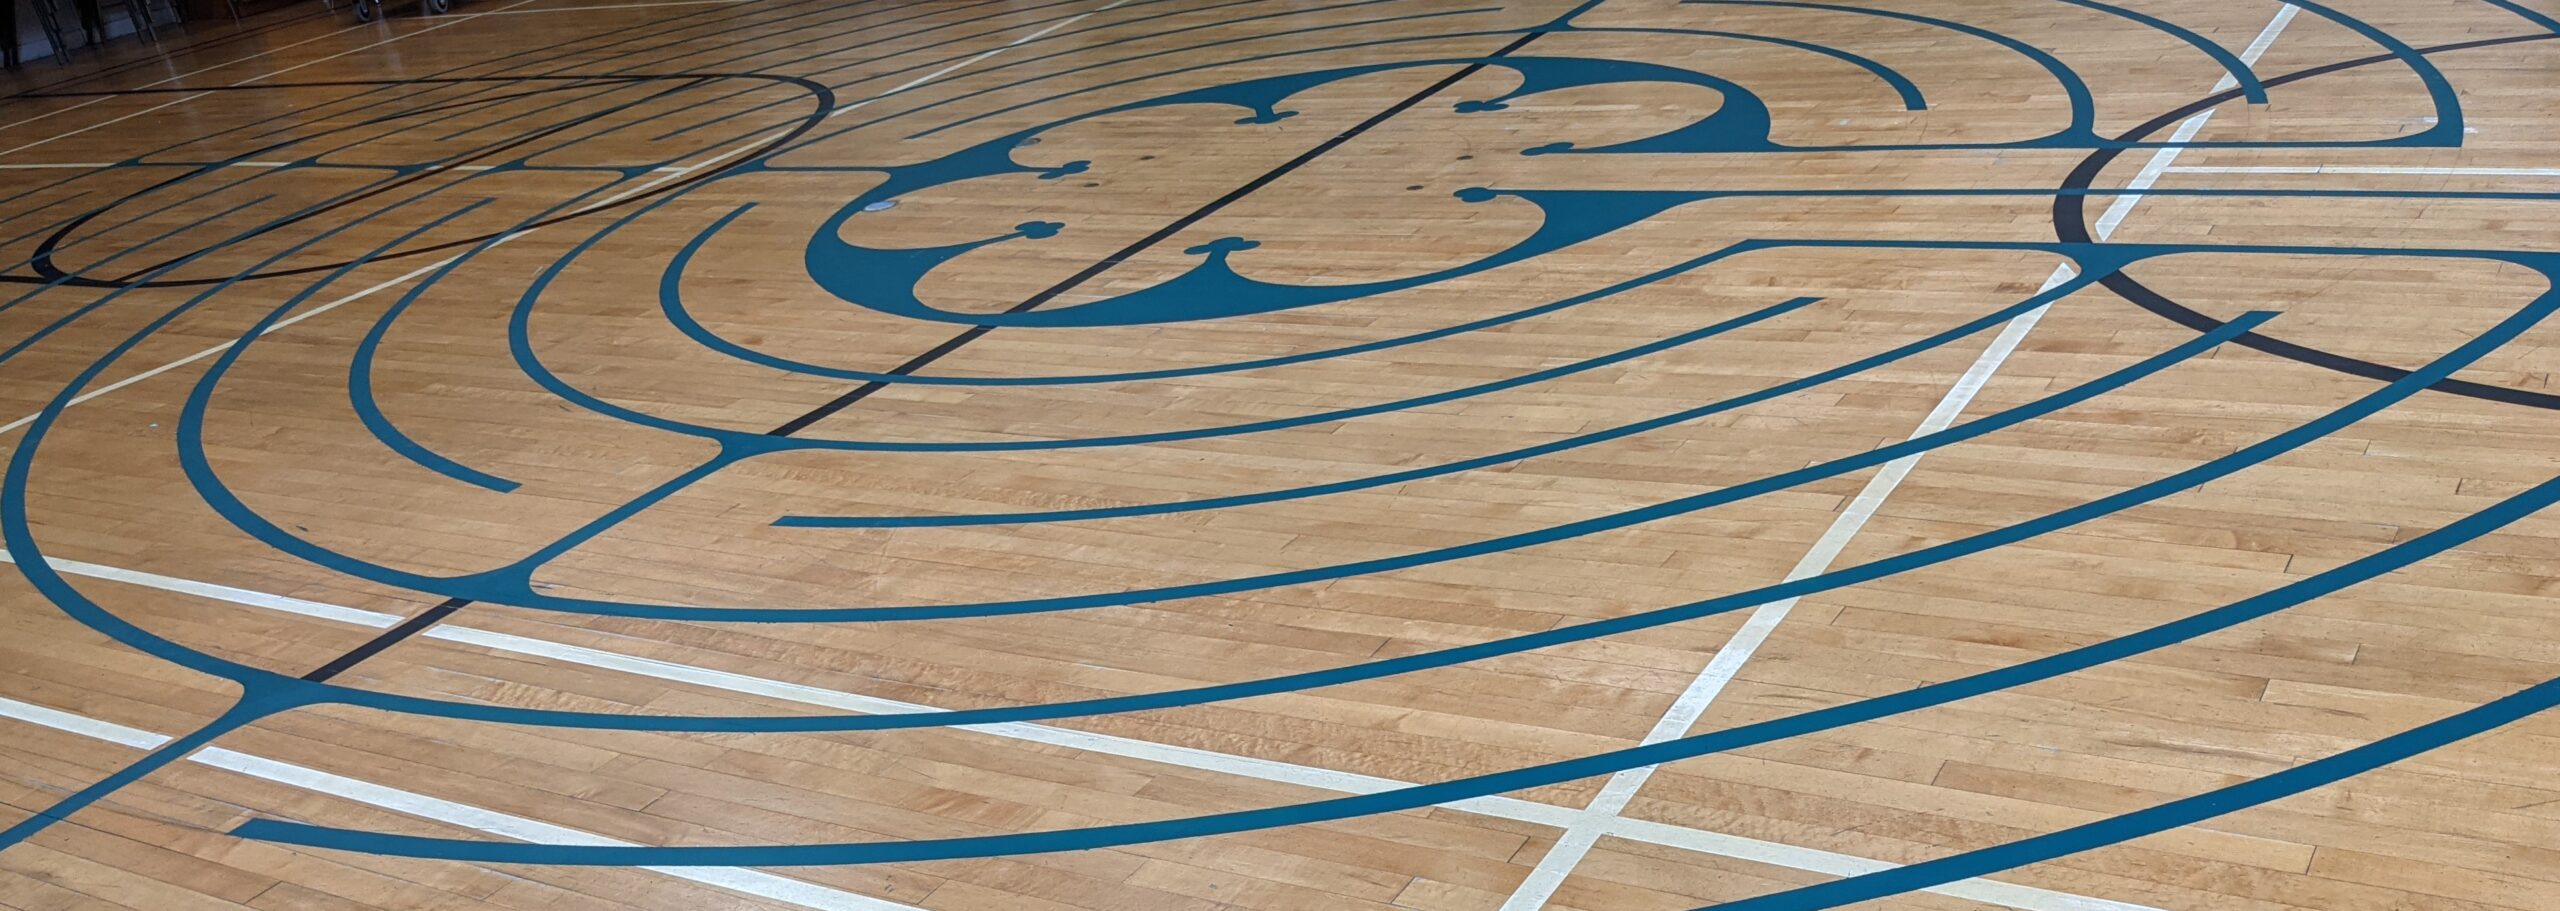 gym floor with labyrith painted